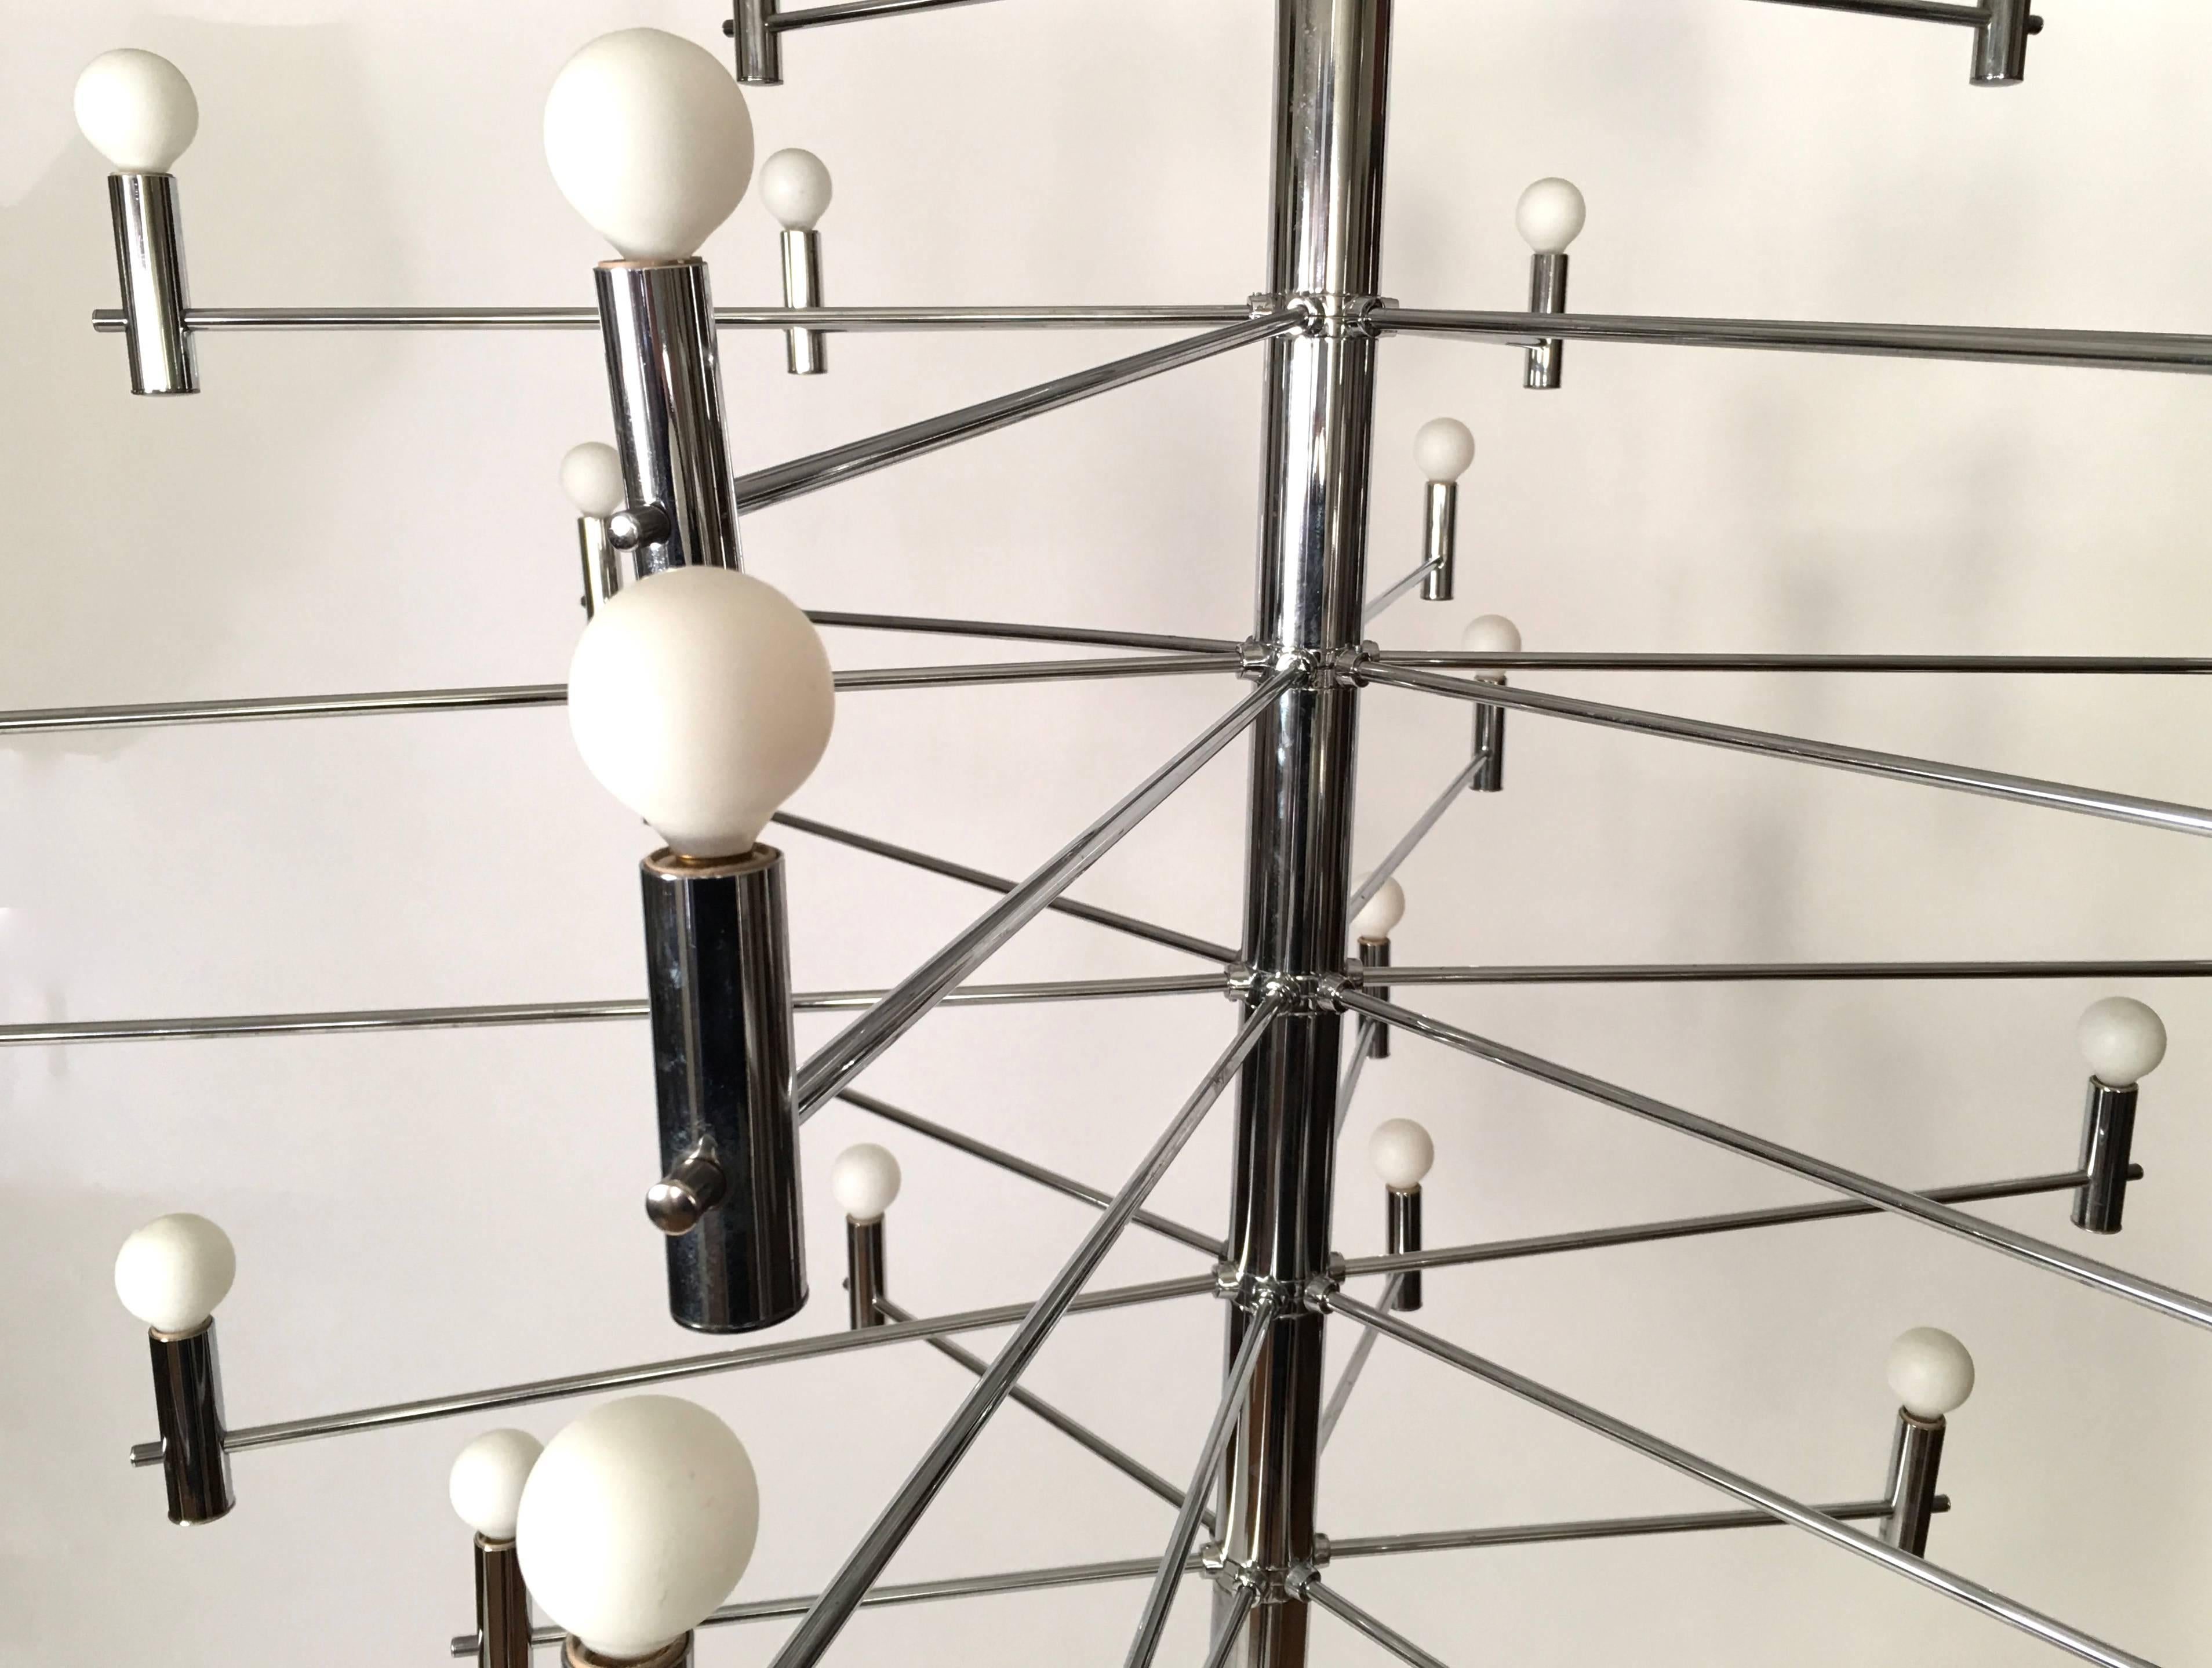 An Italian chrome metal chandelier, the central cylindrical shaft with arms branching out to form an open sphere, made by Metalspot Lighting Company, shown with spherical ping pong ball-sized bulbs. It's wonderfully atmospheric on a dimmer and